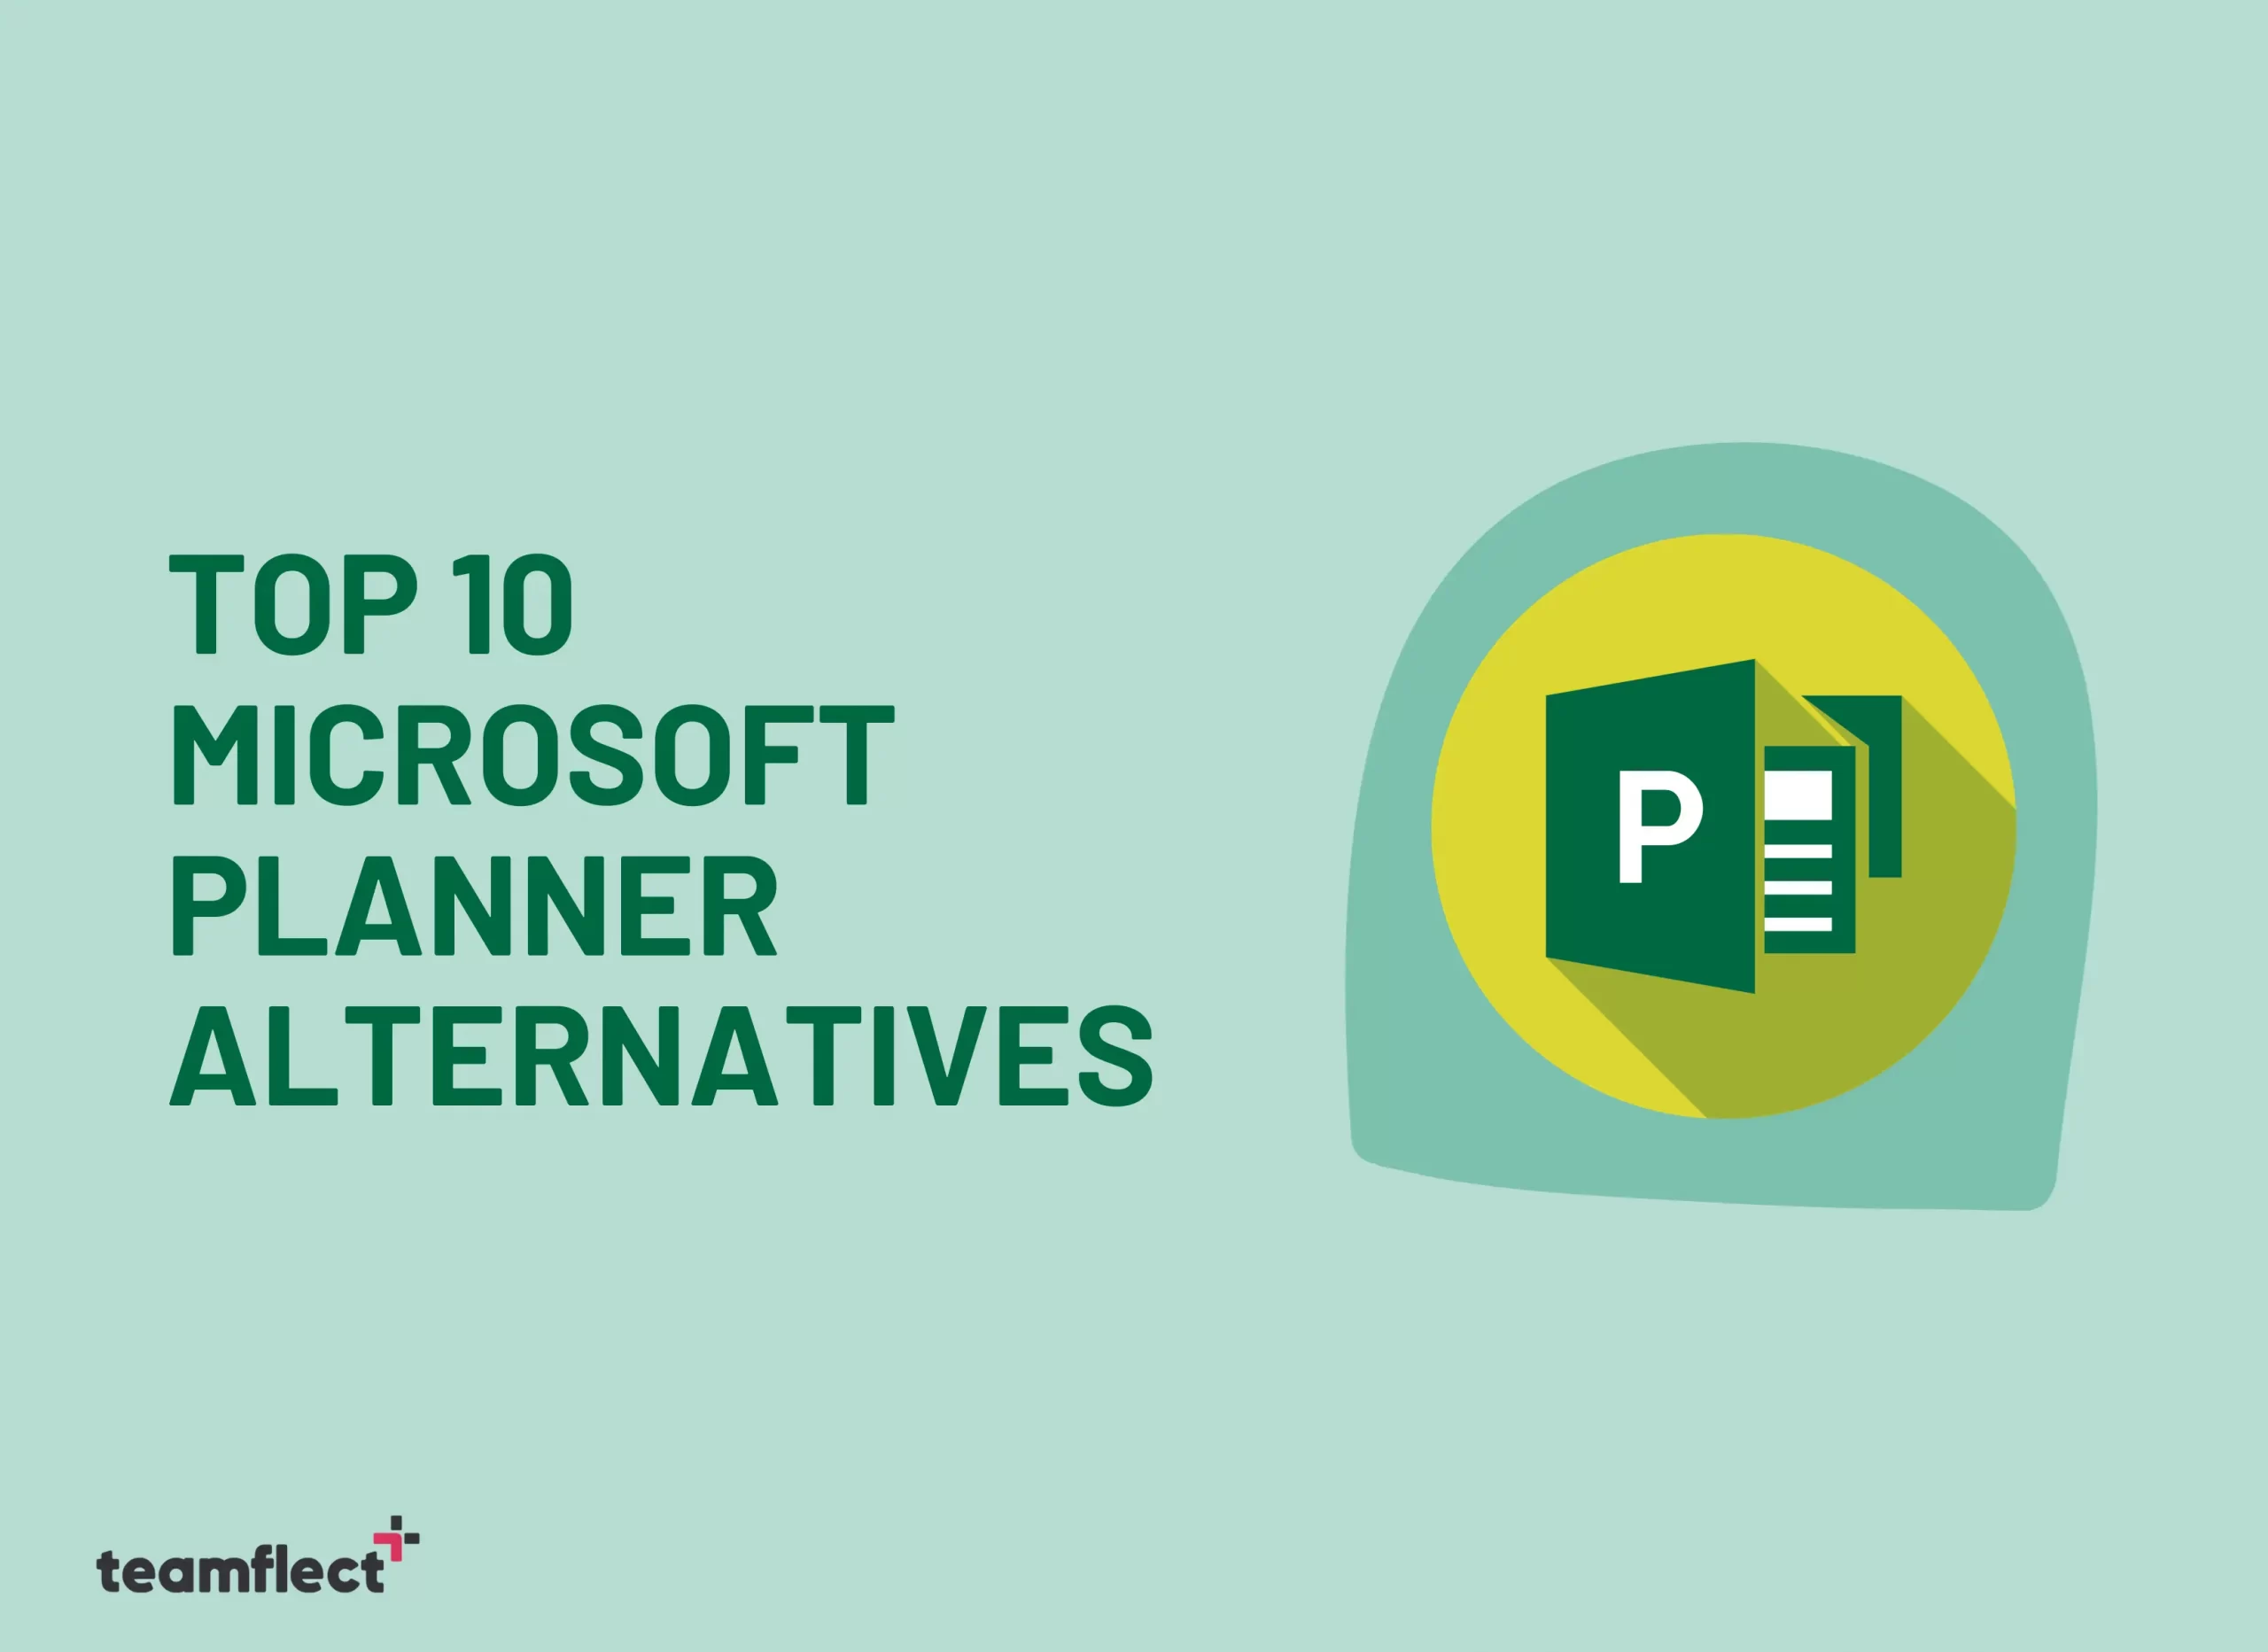 Top Microsoft alternatives for students in 2023